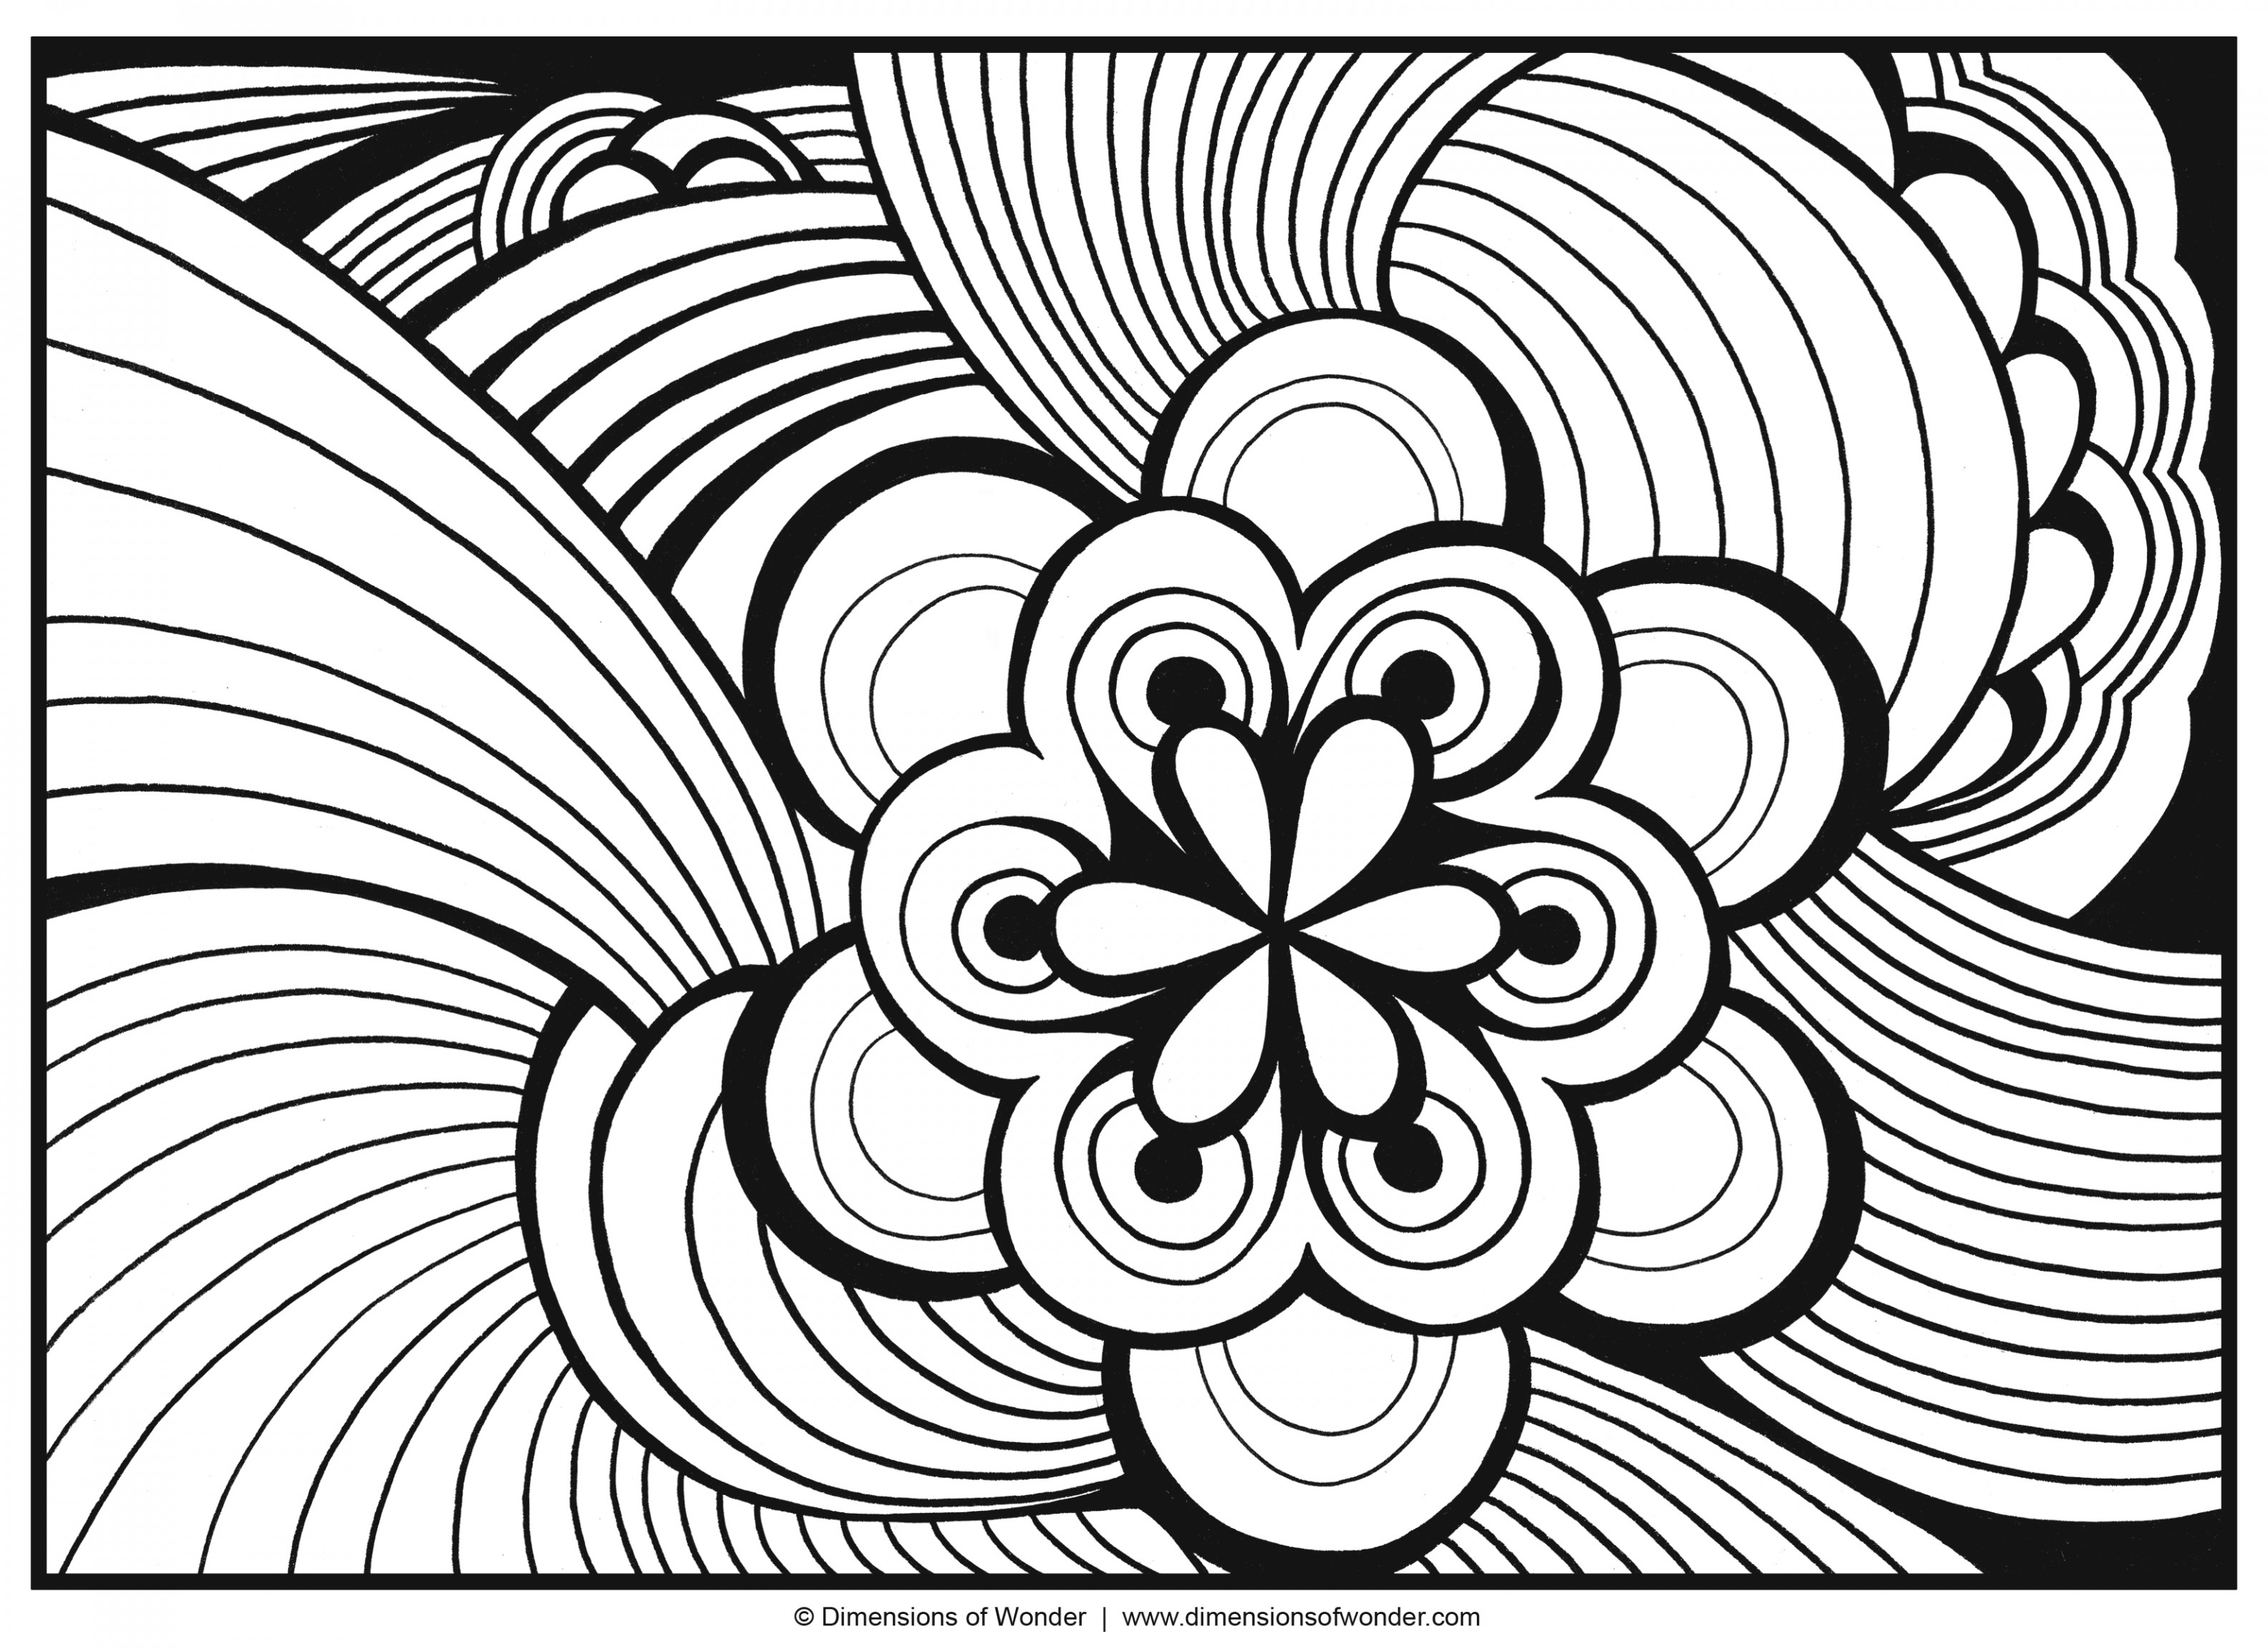 501 Simple Difficult Flower Coloring Pages for Kids